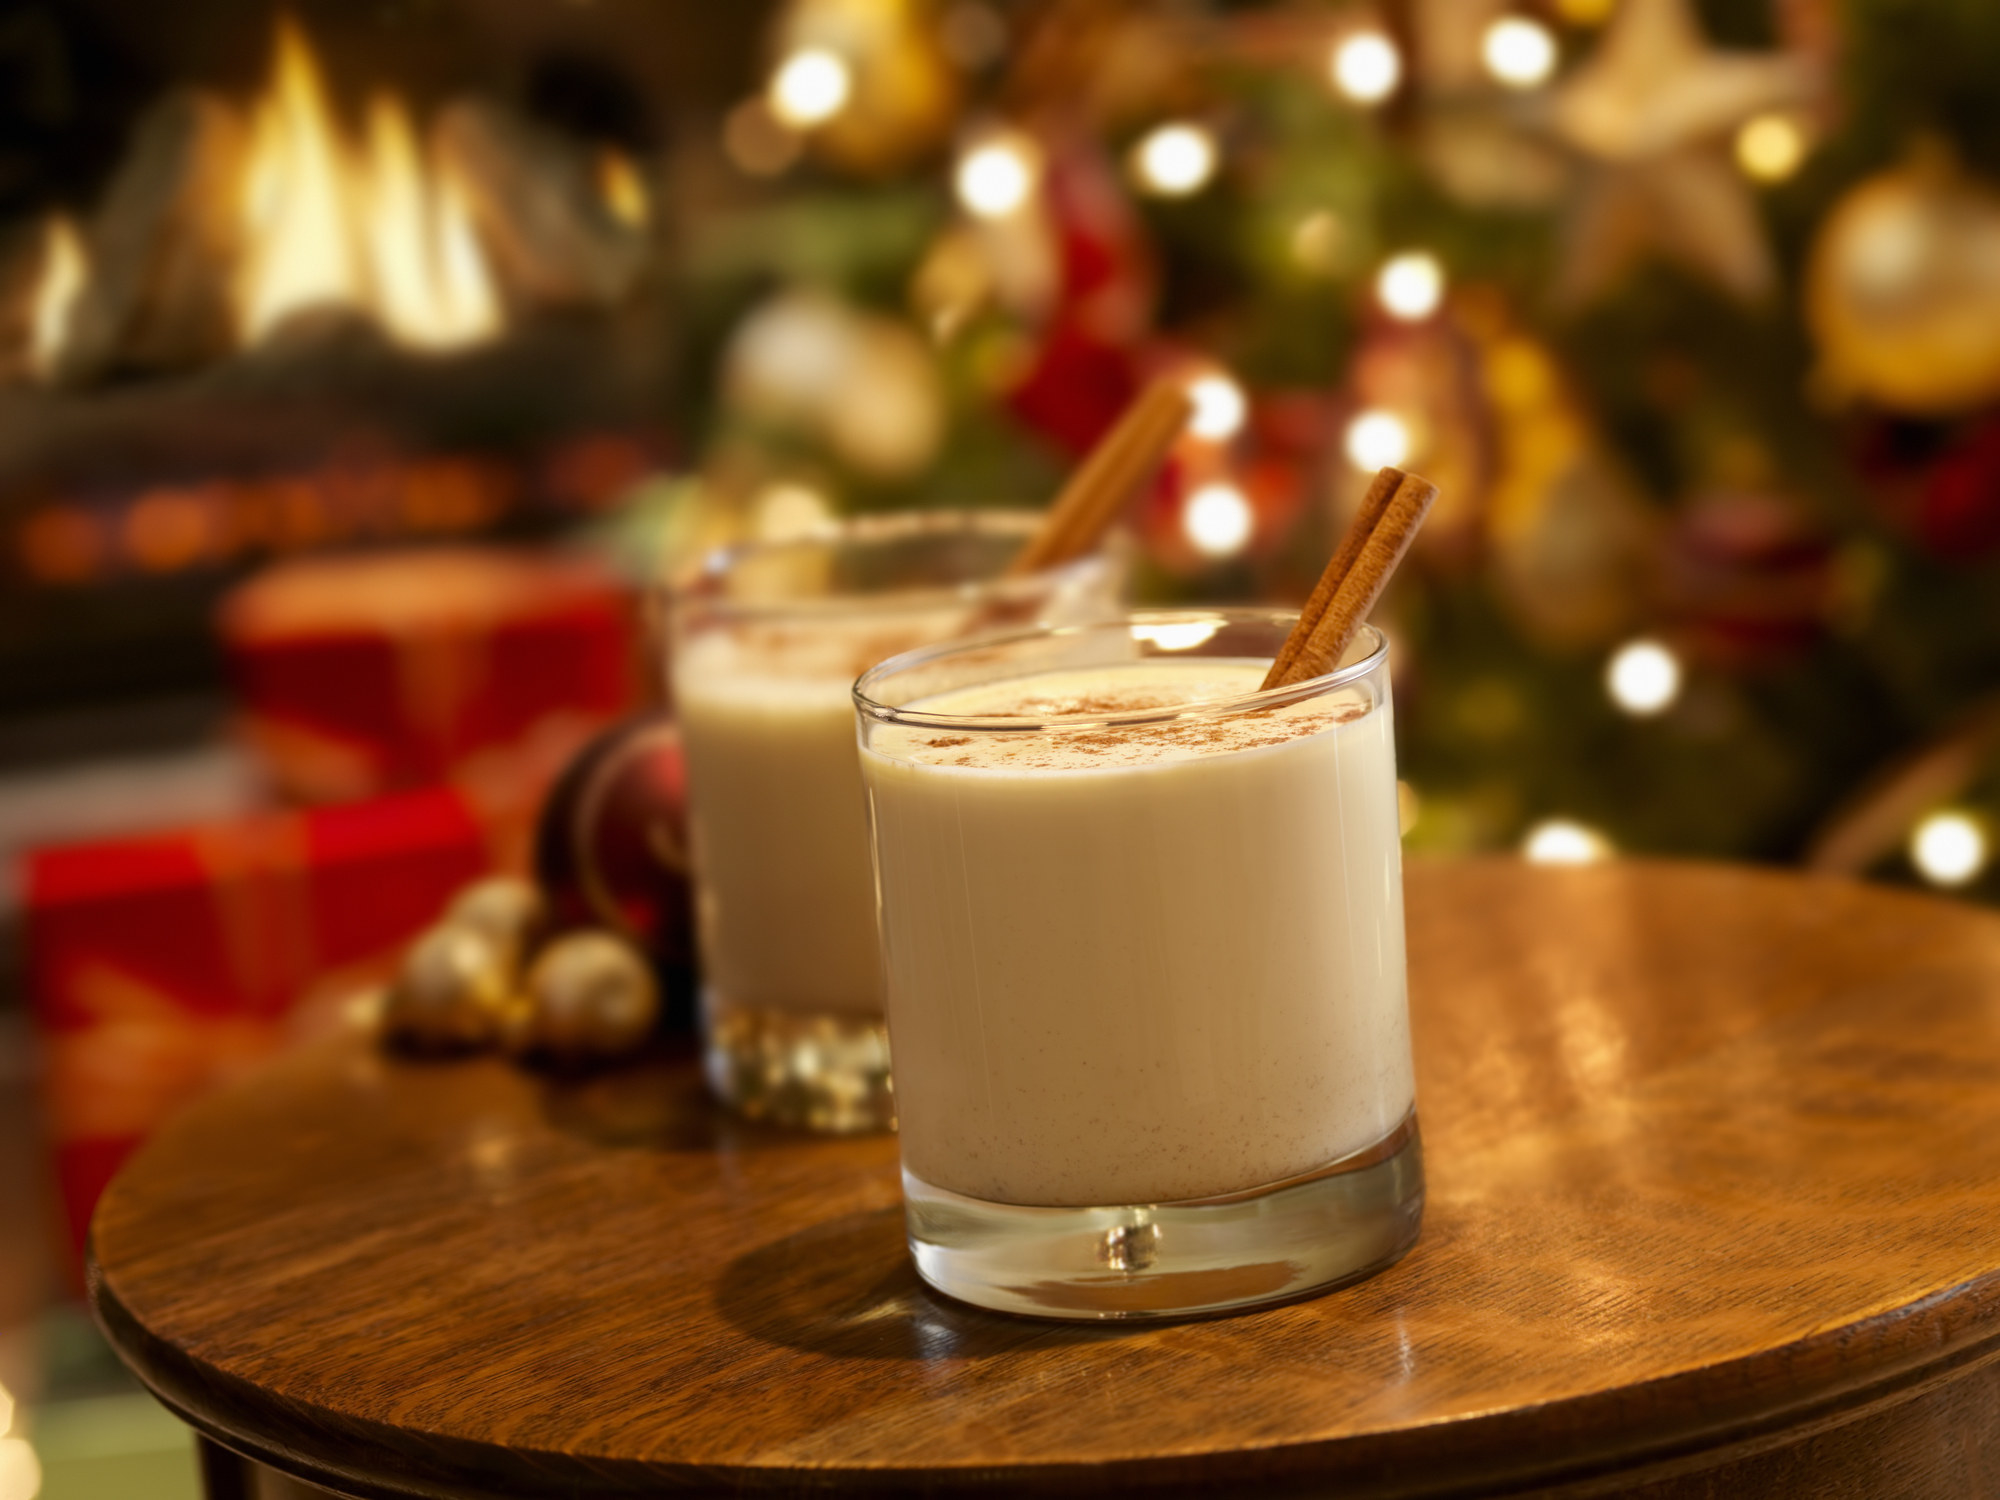 Two glasses of eggnog and cinnamon sticks on a table. There is a Christmas tree with lights on in the background.